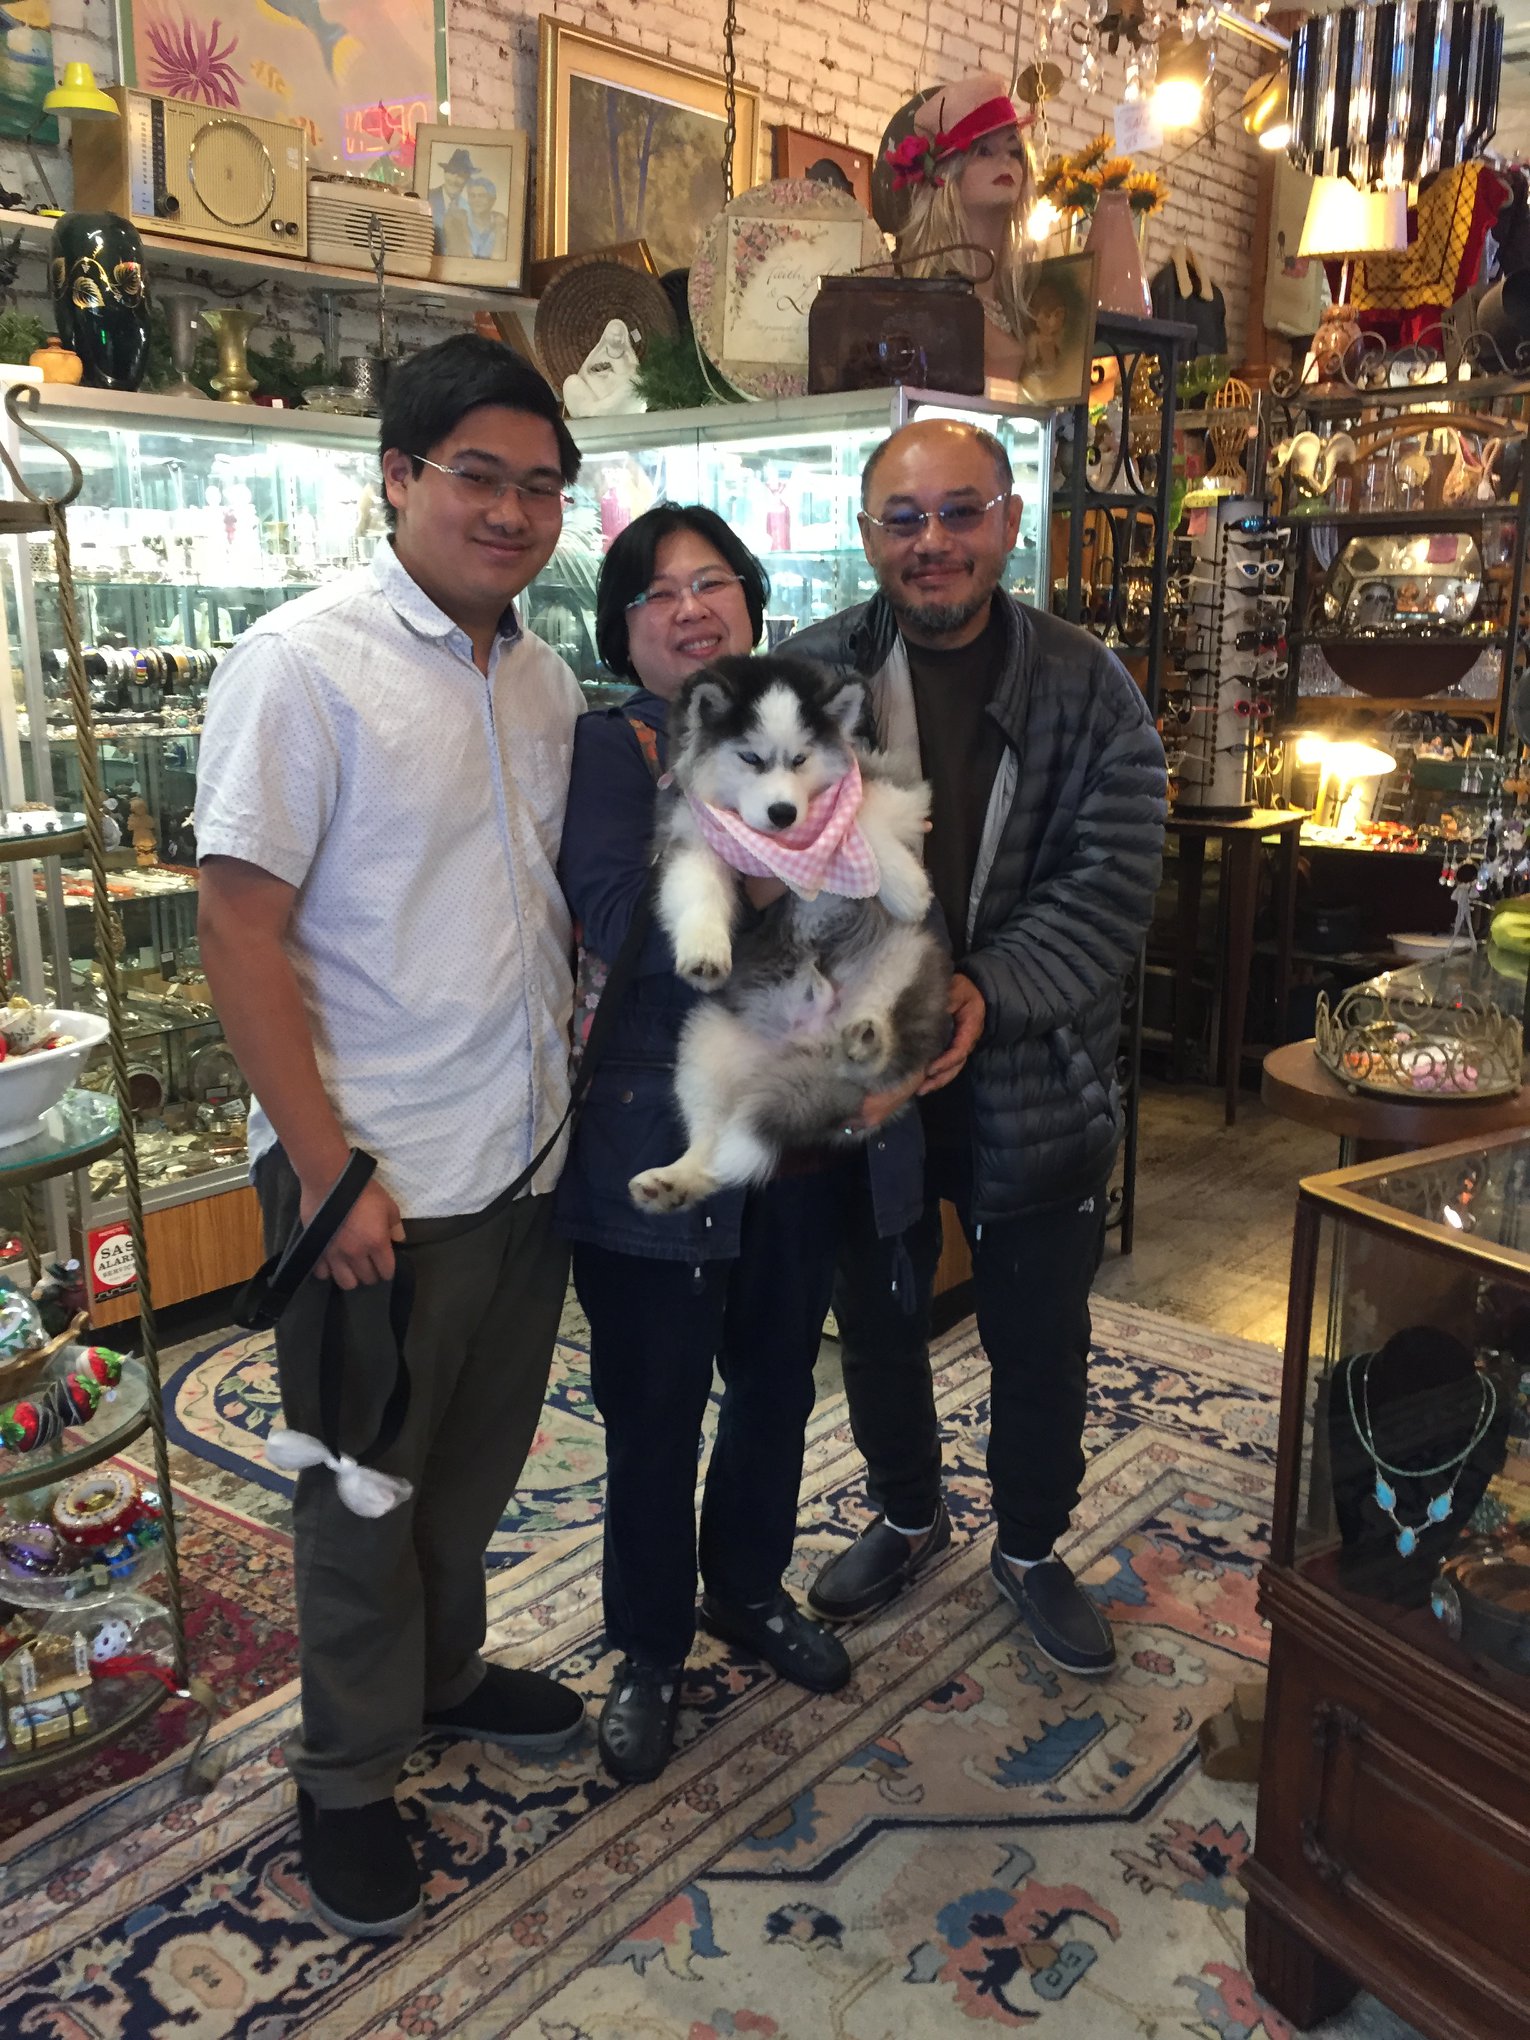 Family of customers in store holding dog